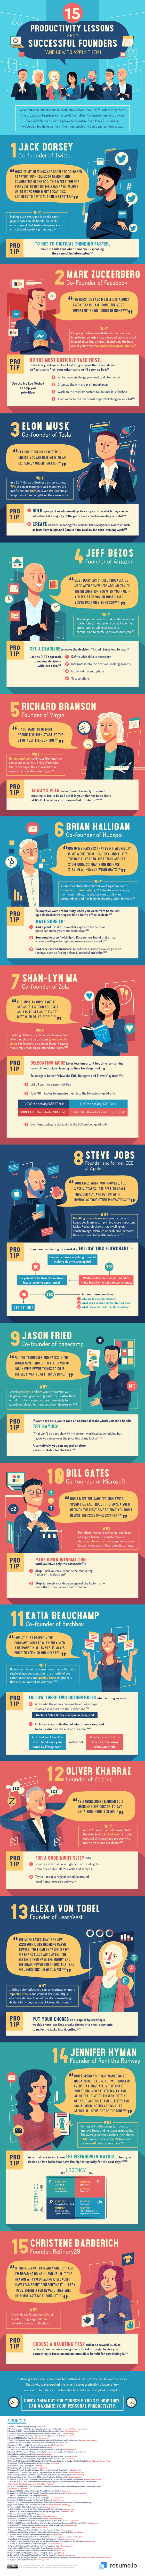 15-productivity-lessons-from-successful-founders-and-how-to-apply-them (1)